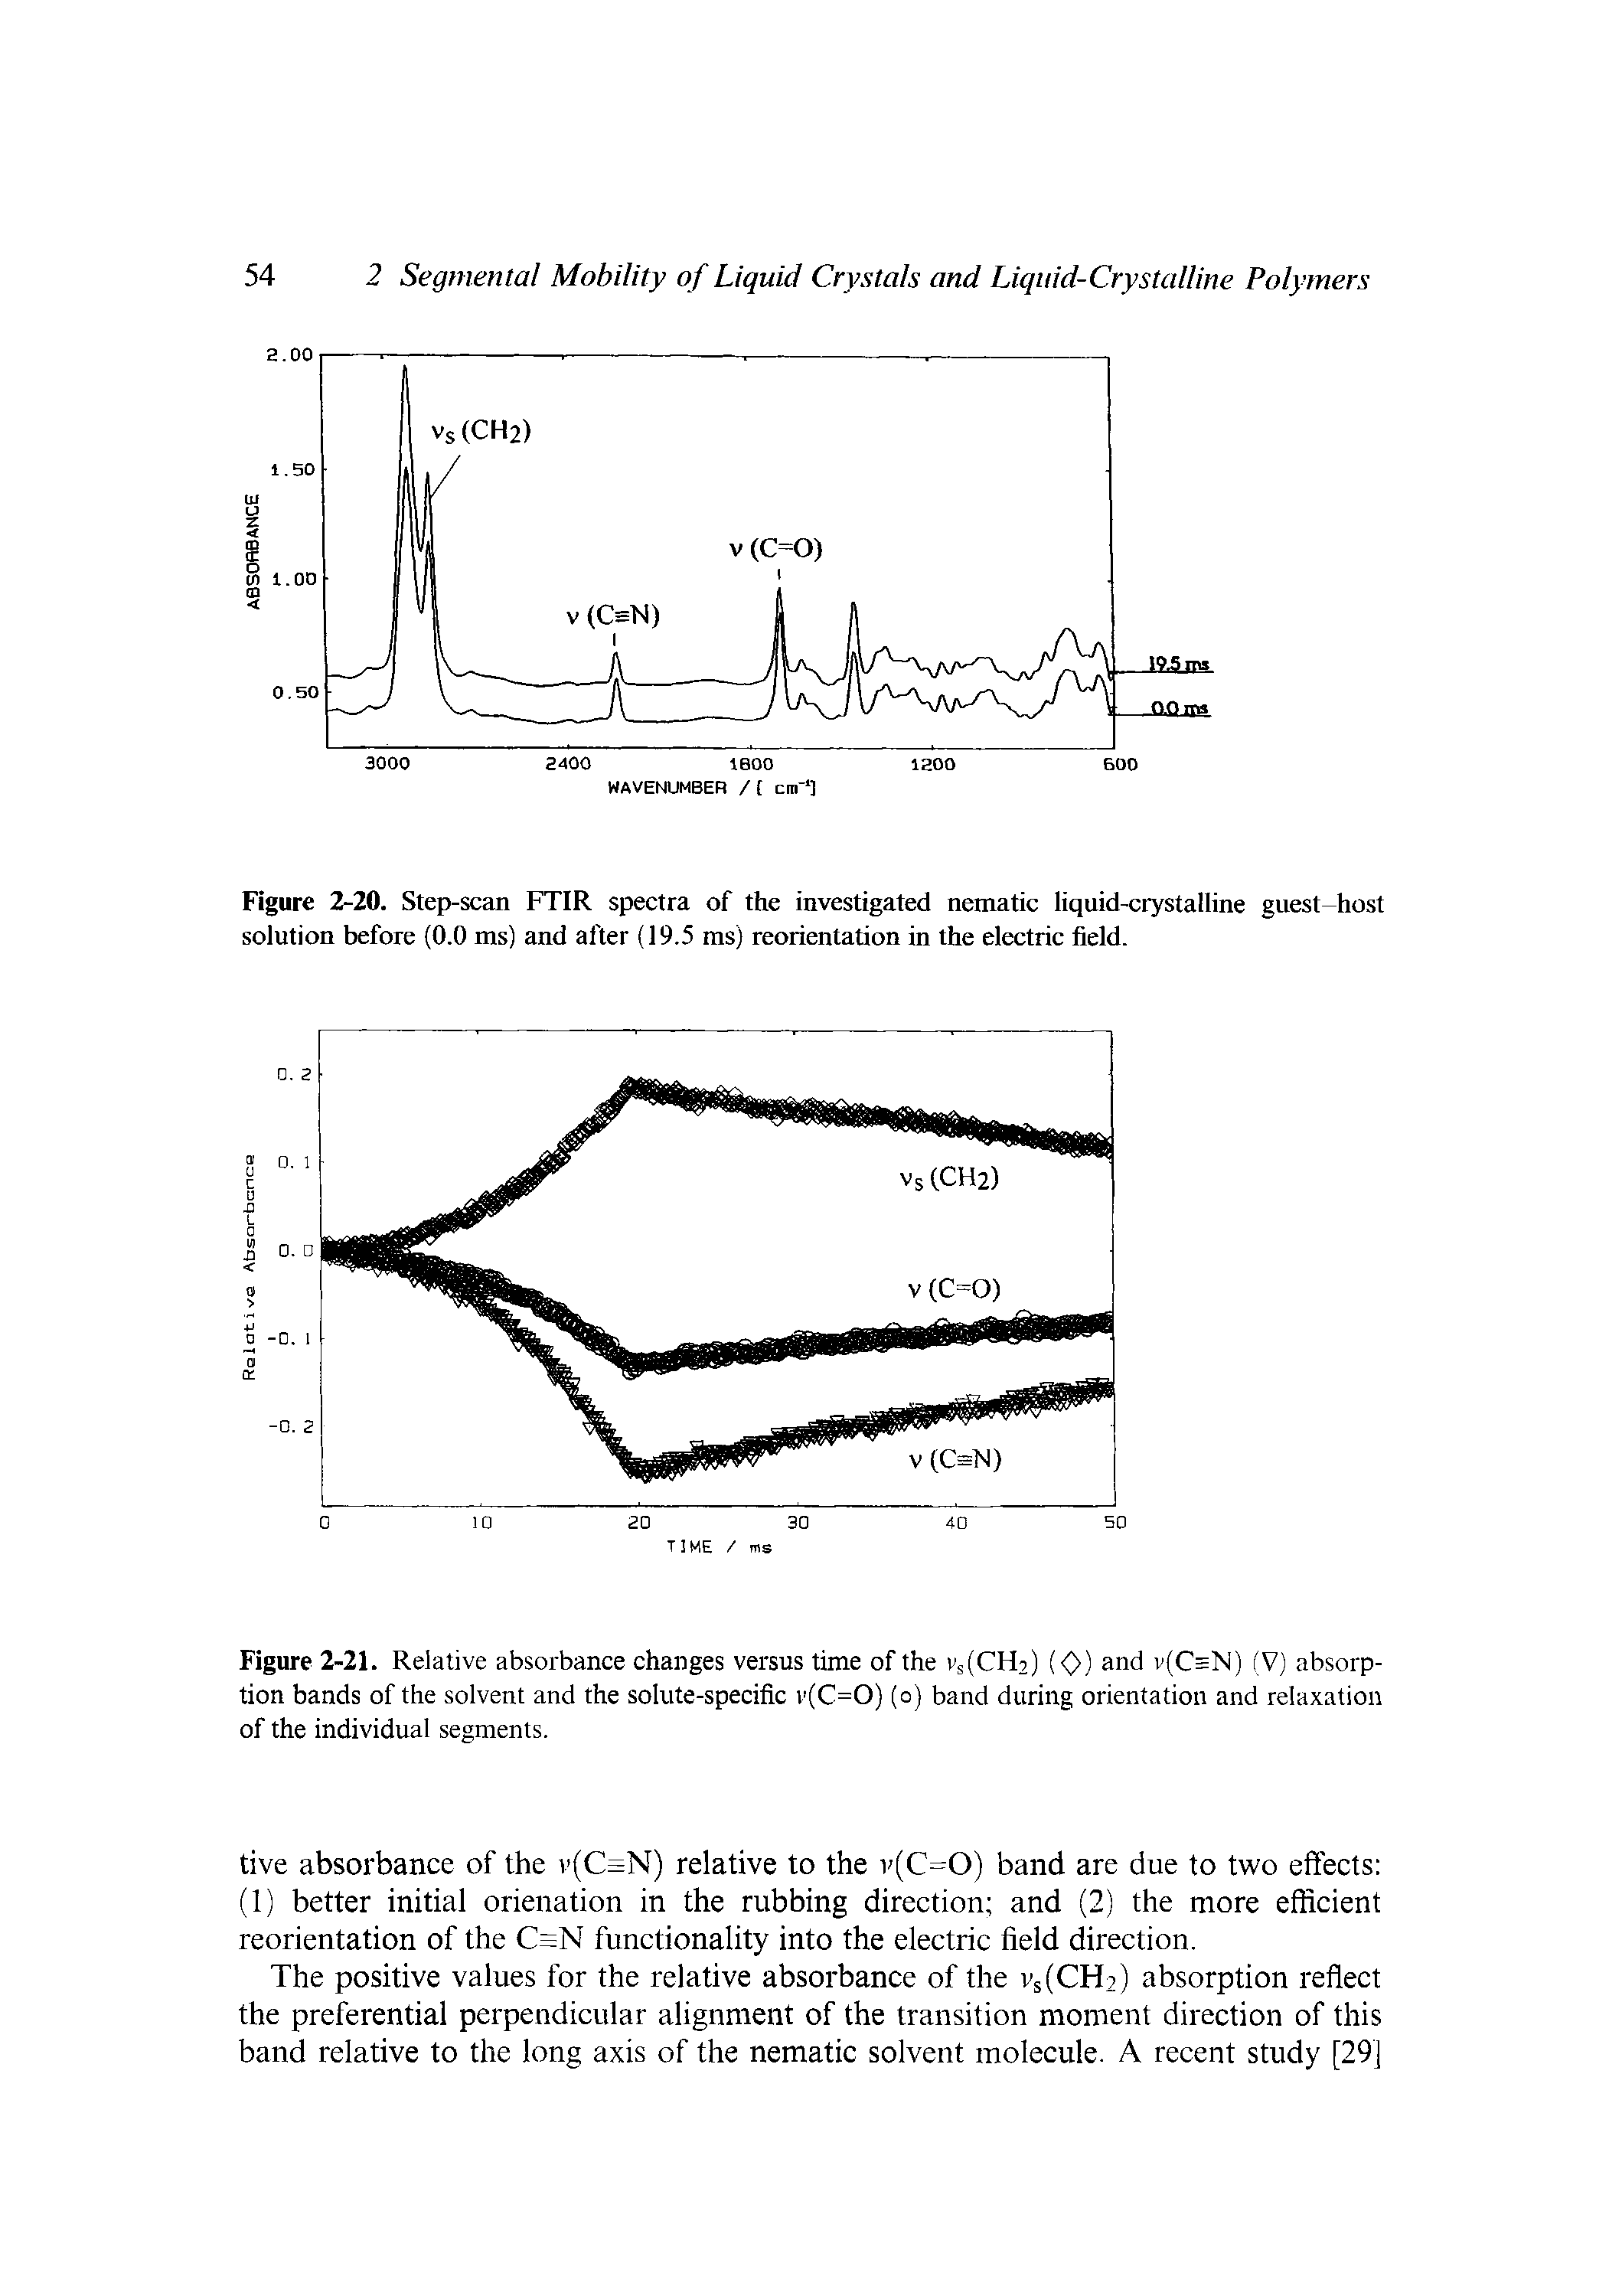 Figure 2-20. Step-scan FTIR spectra of the investigated nematic liquid-crystalline guest host solution before (0.0 ms) and after (19.5 ms) reorientation in the electric field.